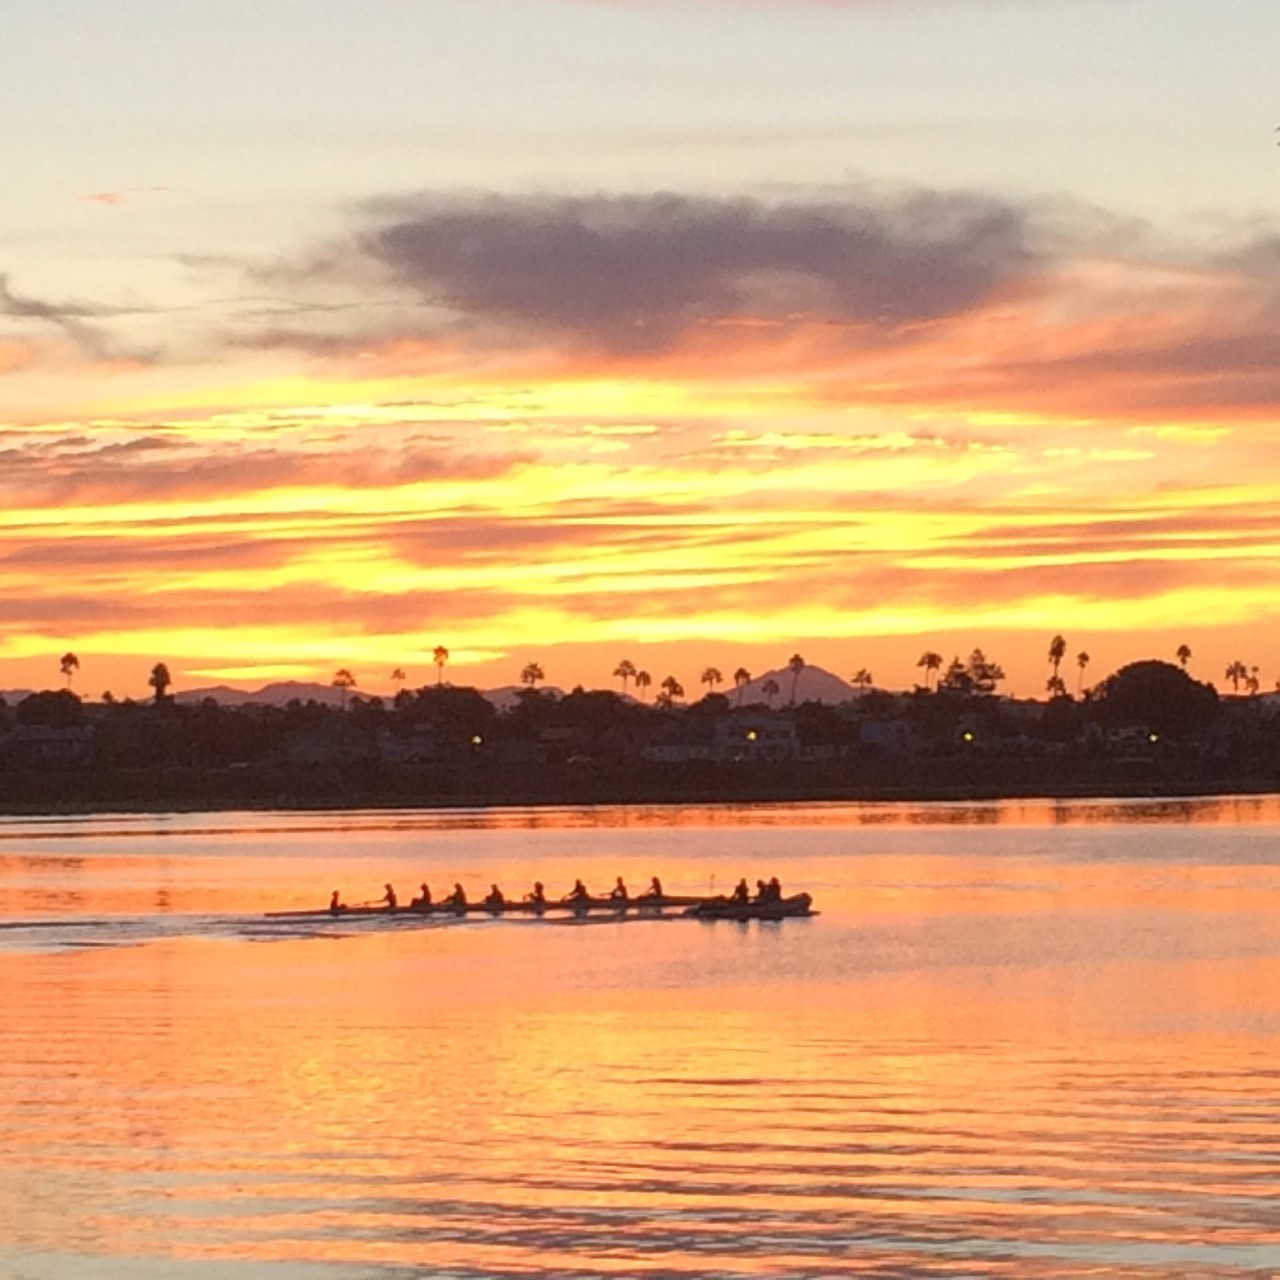 Rowing Crew at Dawn on the river